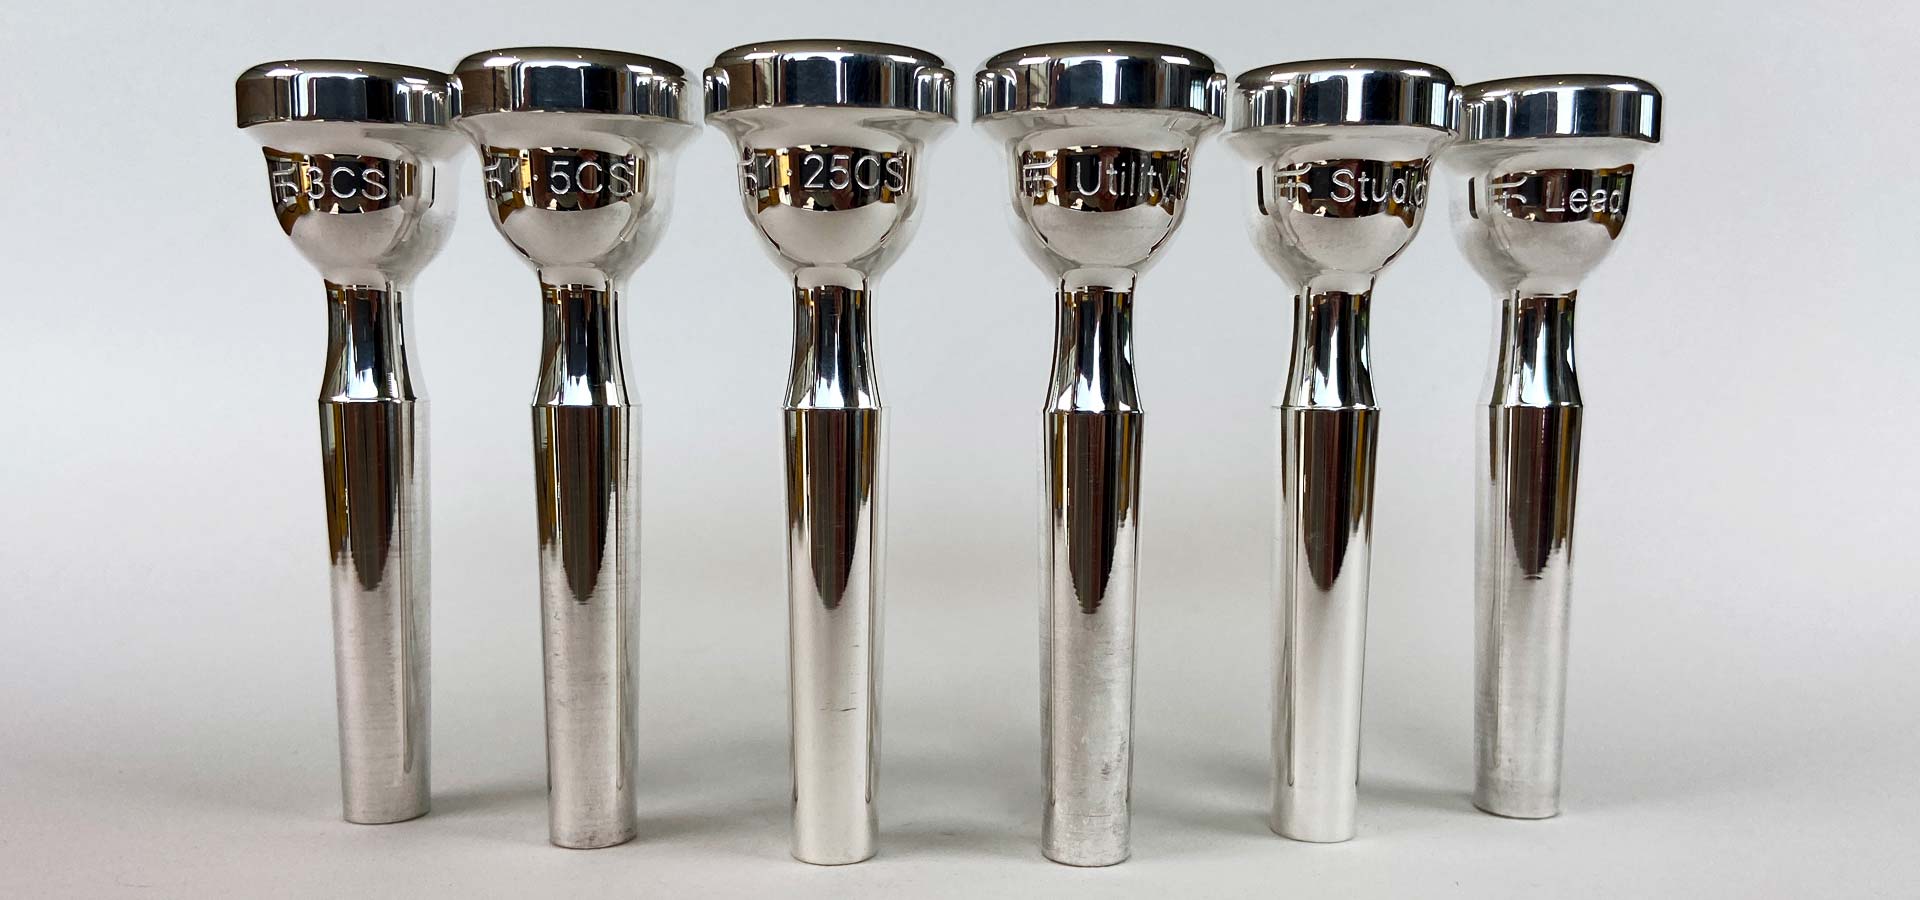 Fultone Brass - Ft Series - Mouthpieces - Classic Series and Commercial Range Mouthpieces